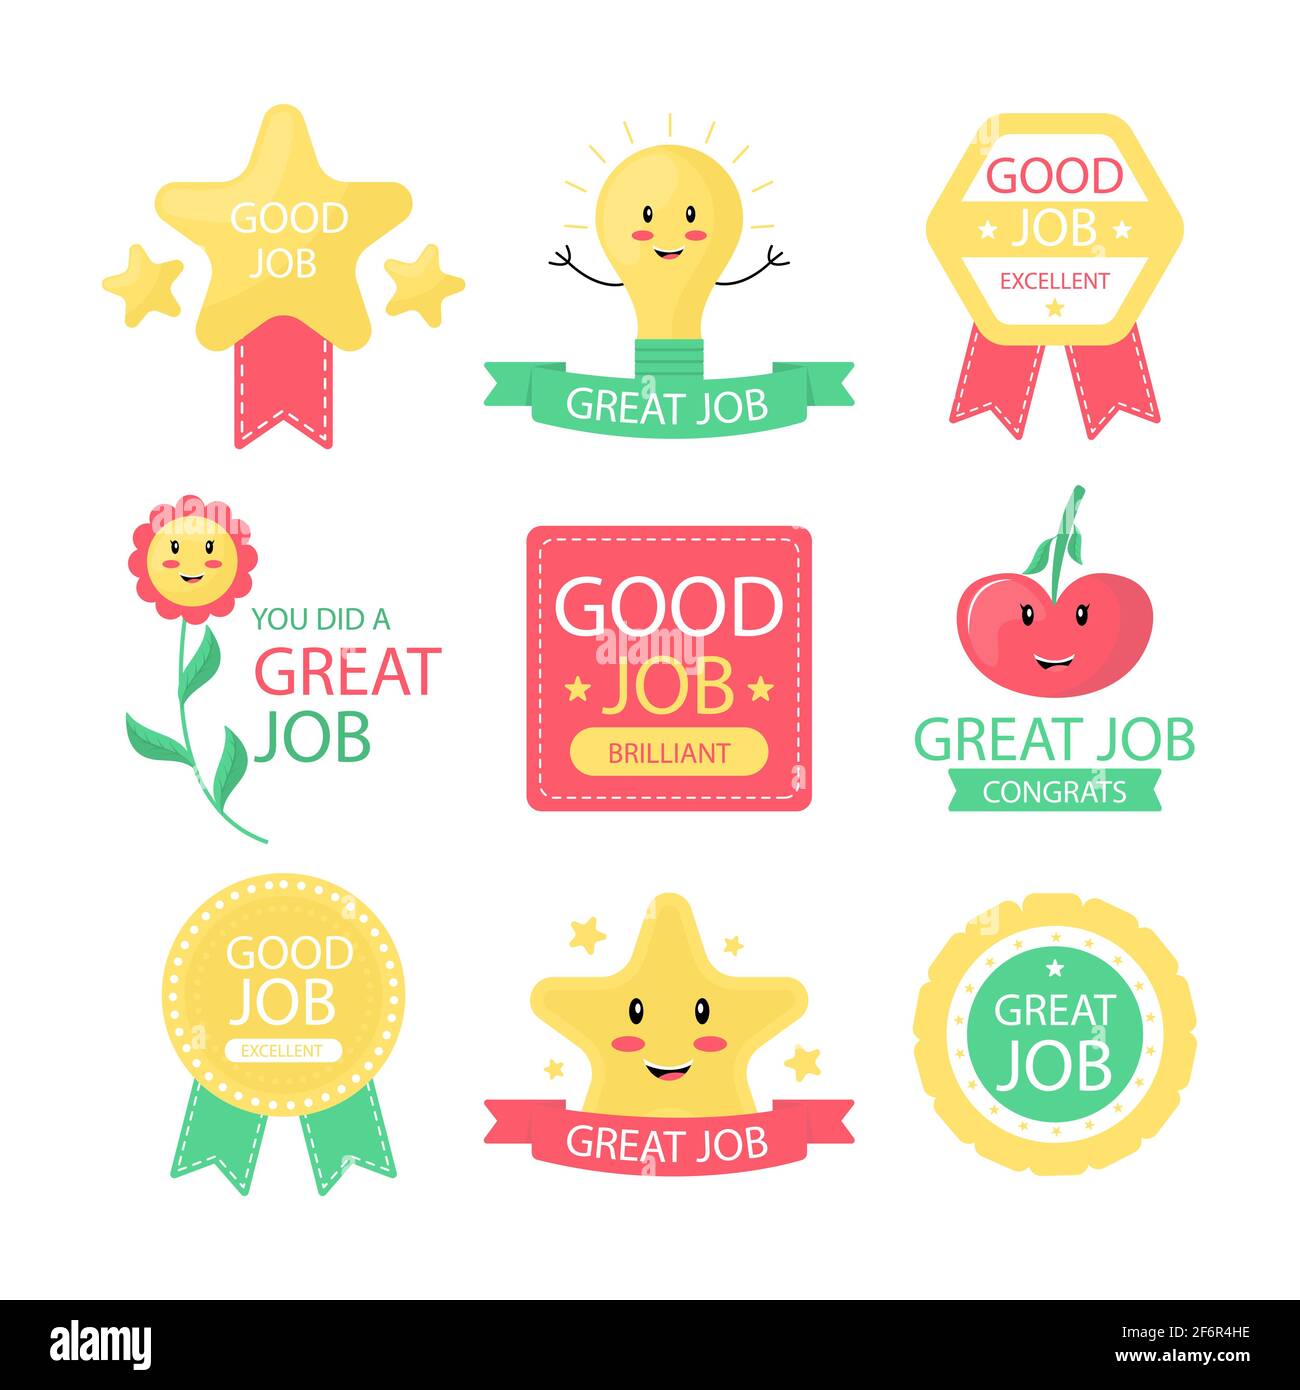 Collection of Good Job and Great Job Stickers Stock Vector - Illustration  of collection, congratulations: 223341979